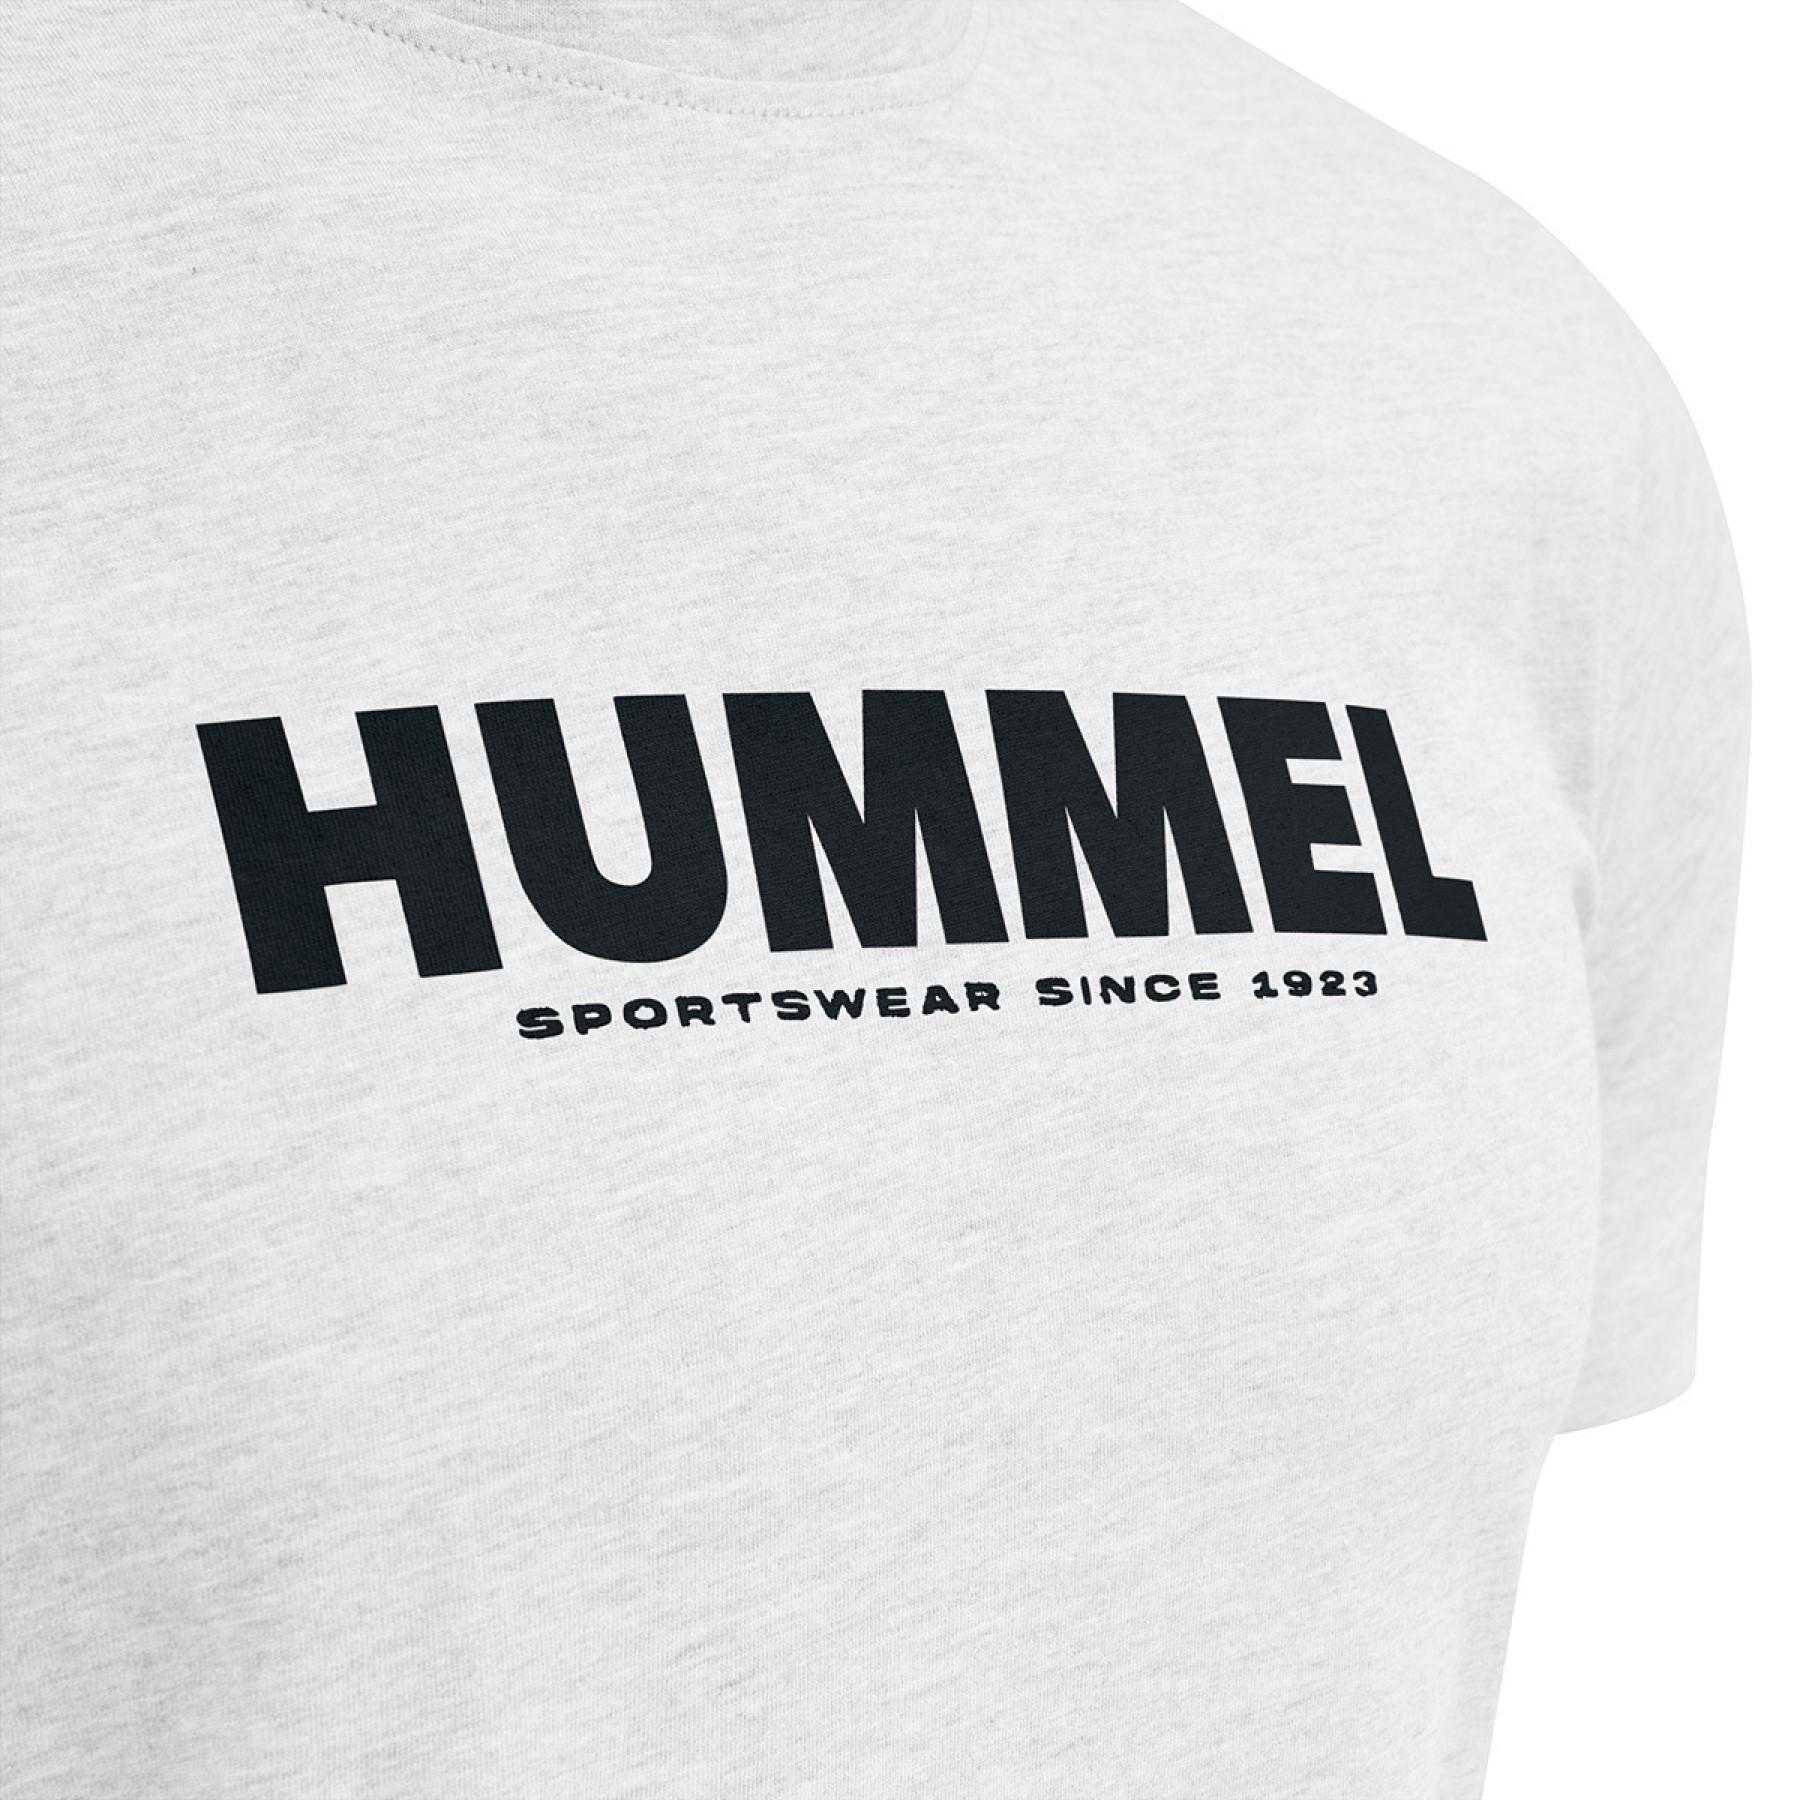 Textile and - Hummel T-shirt - T-shirts Table hmllegacy tennis polos -